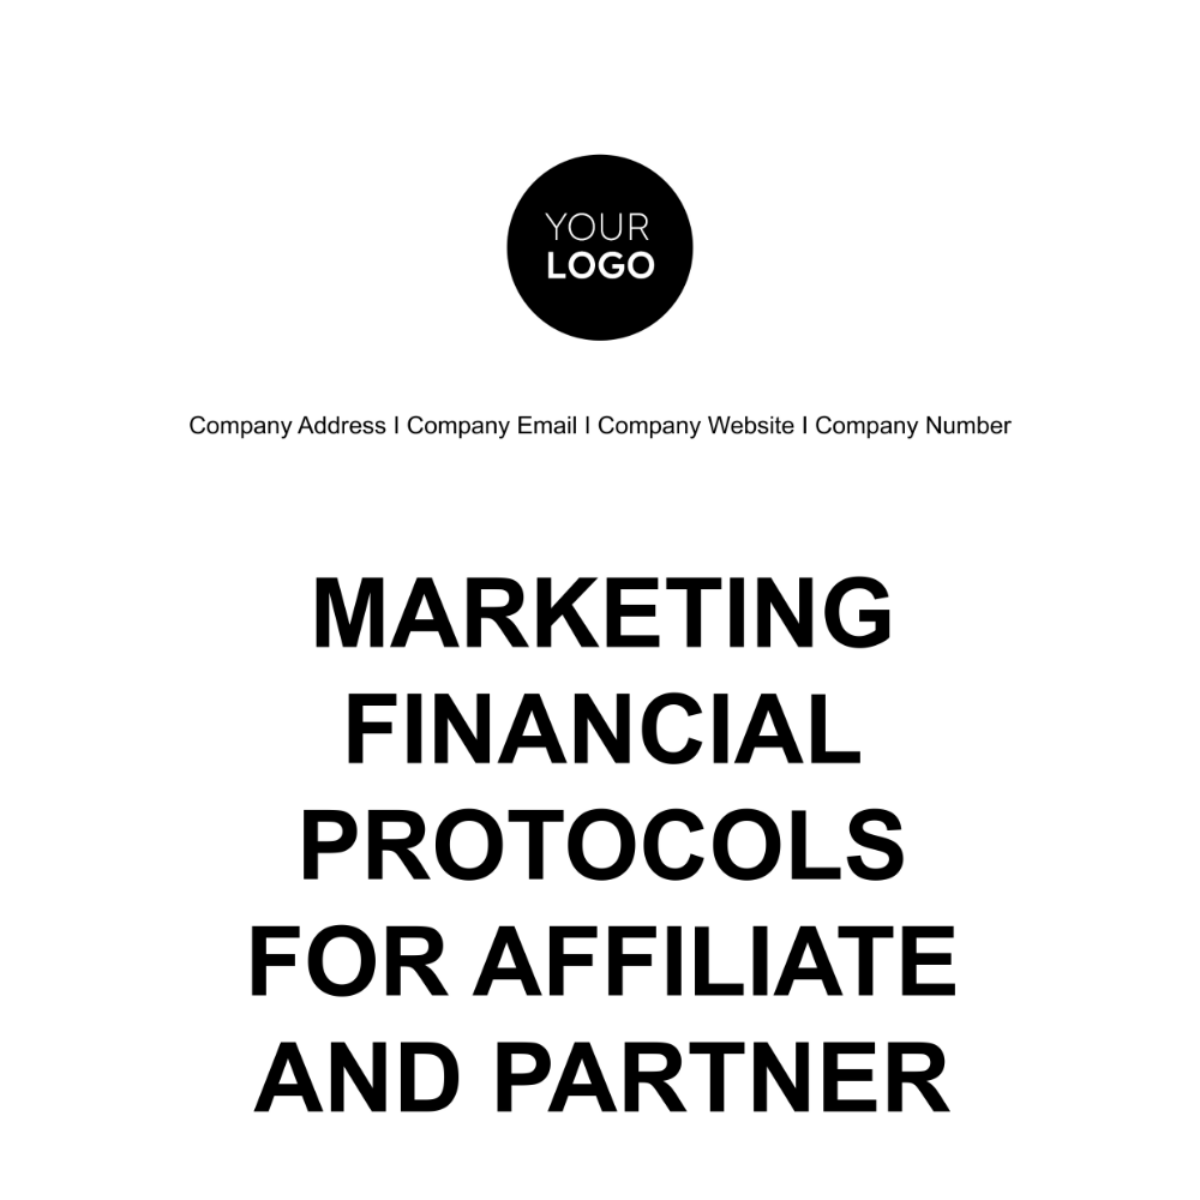 Free Marketing Financial Protocols for Affiliate and Partner Template